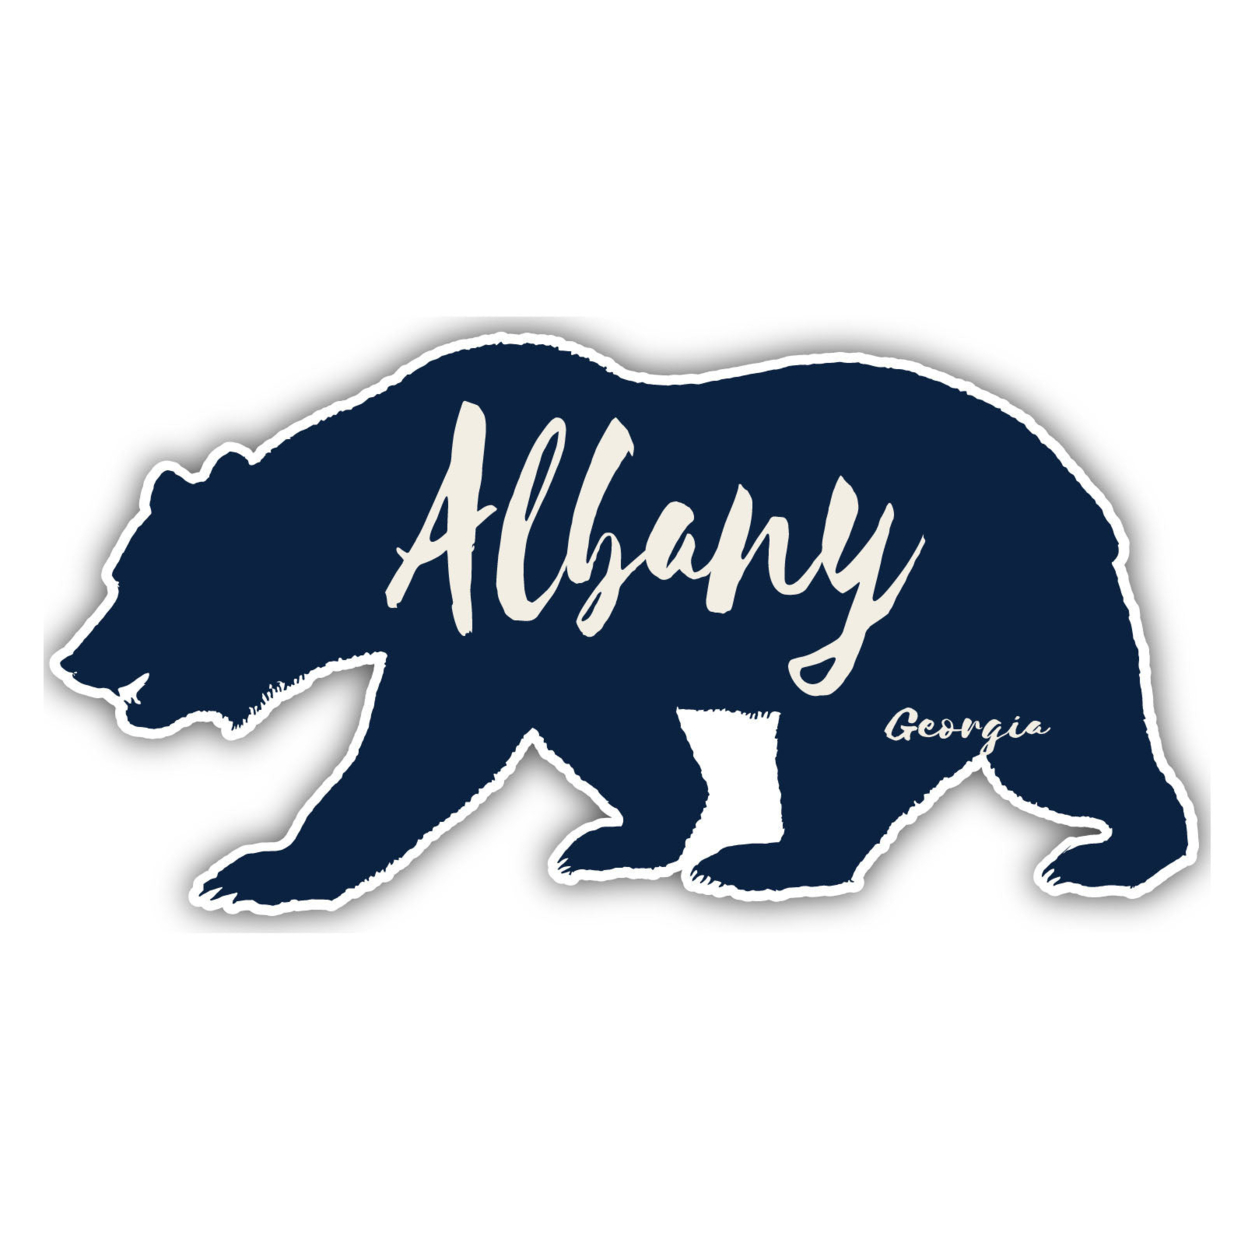 Albany Georgia Souvenir Decorative Stickers (Choose Theme And Size) - 4-Pack, 2-Inch, Tent